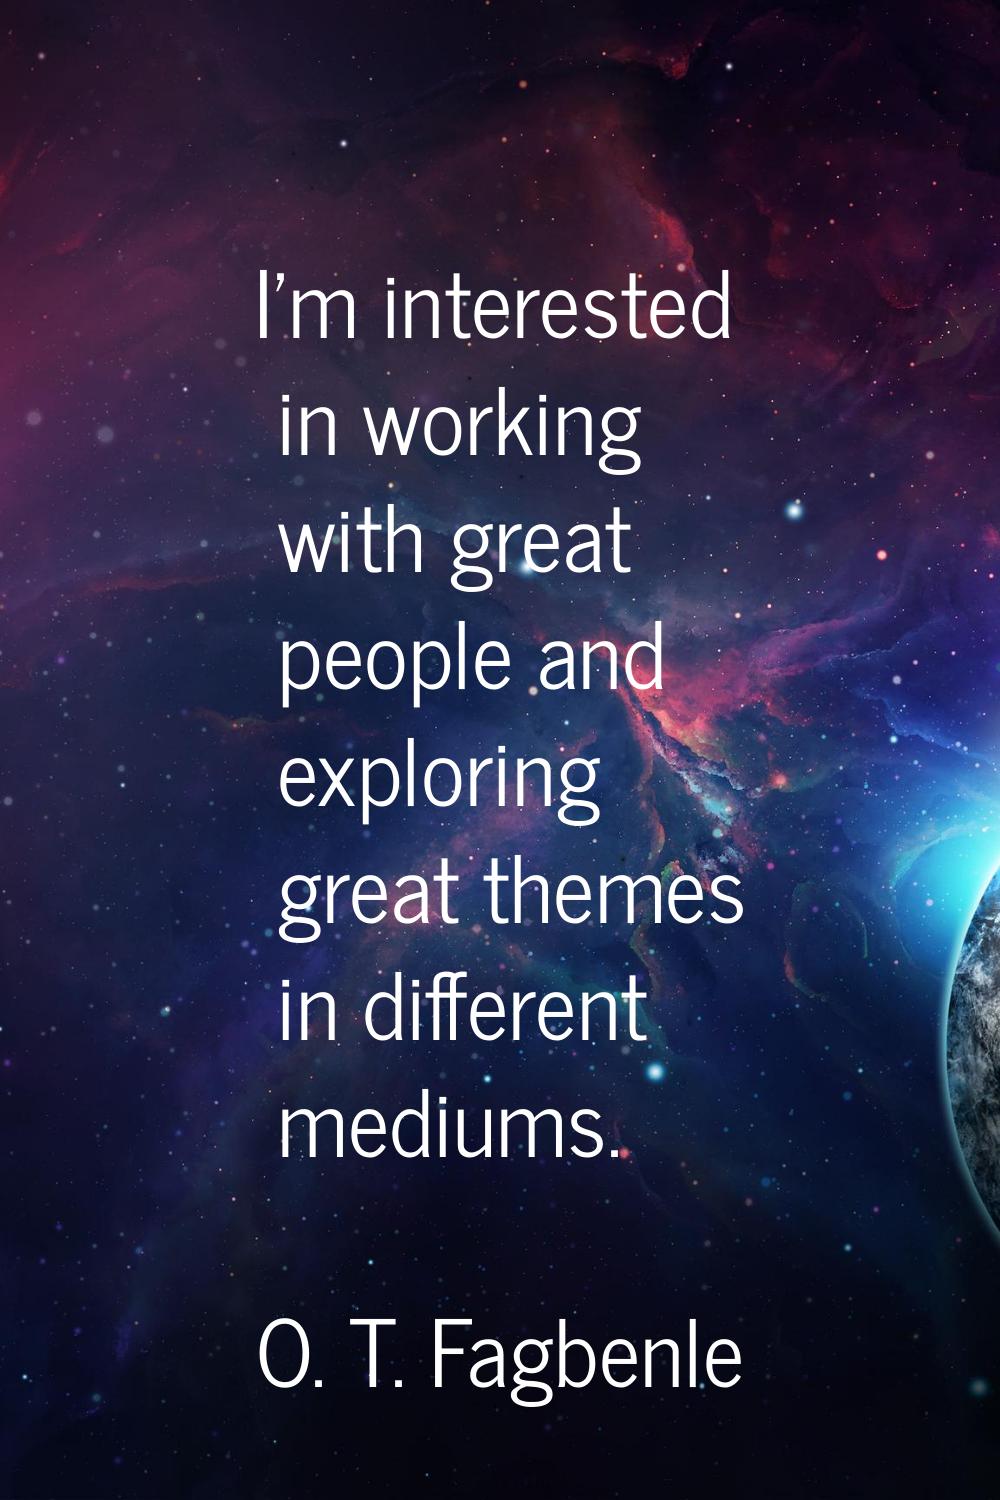 I'm interested in working with great people and exploring great themes in different mediums.